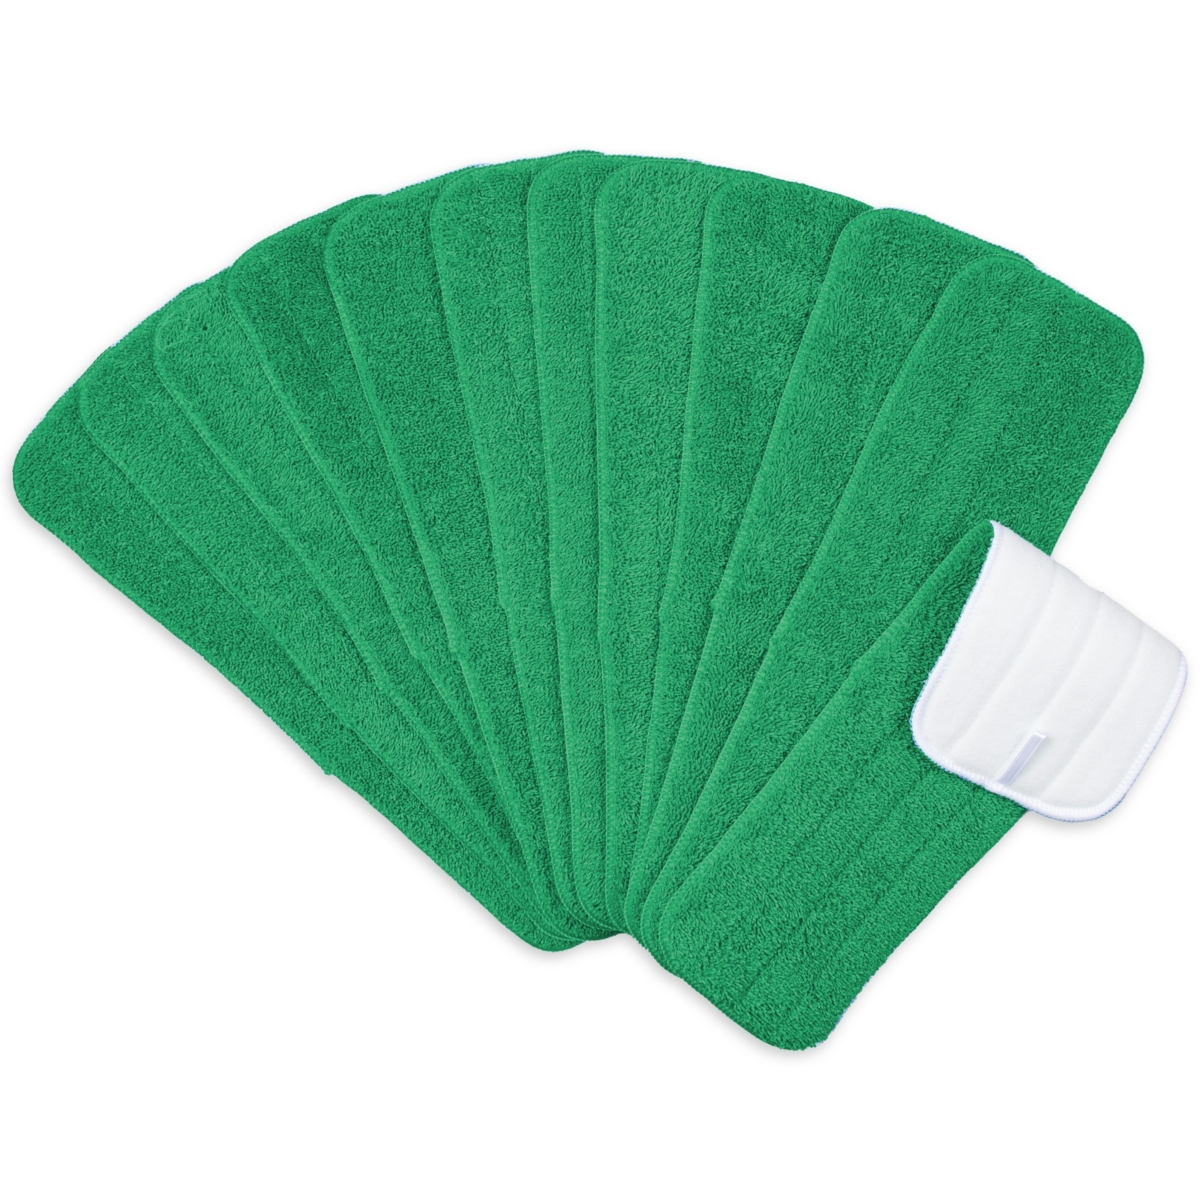 Arkwright Economy Microfiber Flat Wet Mop Pad Refills (12 Pack) - 18", Color Options - Green